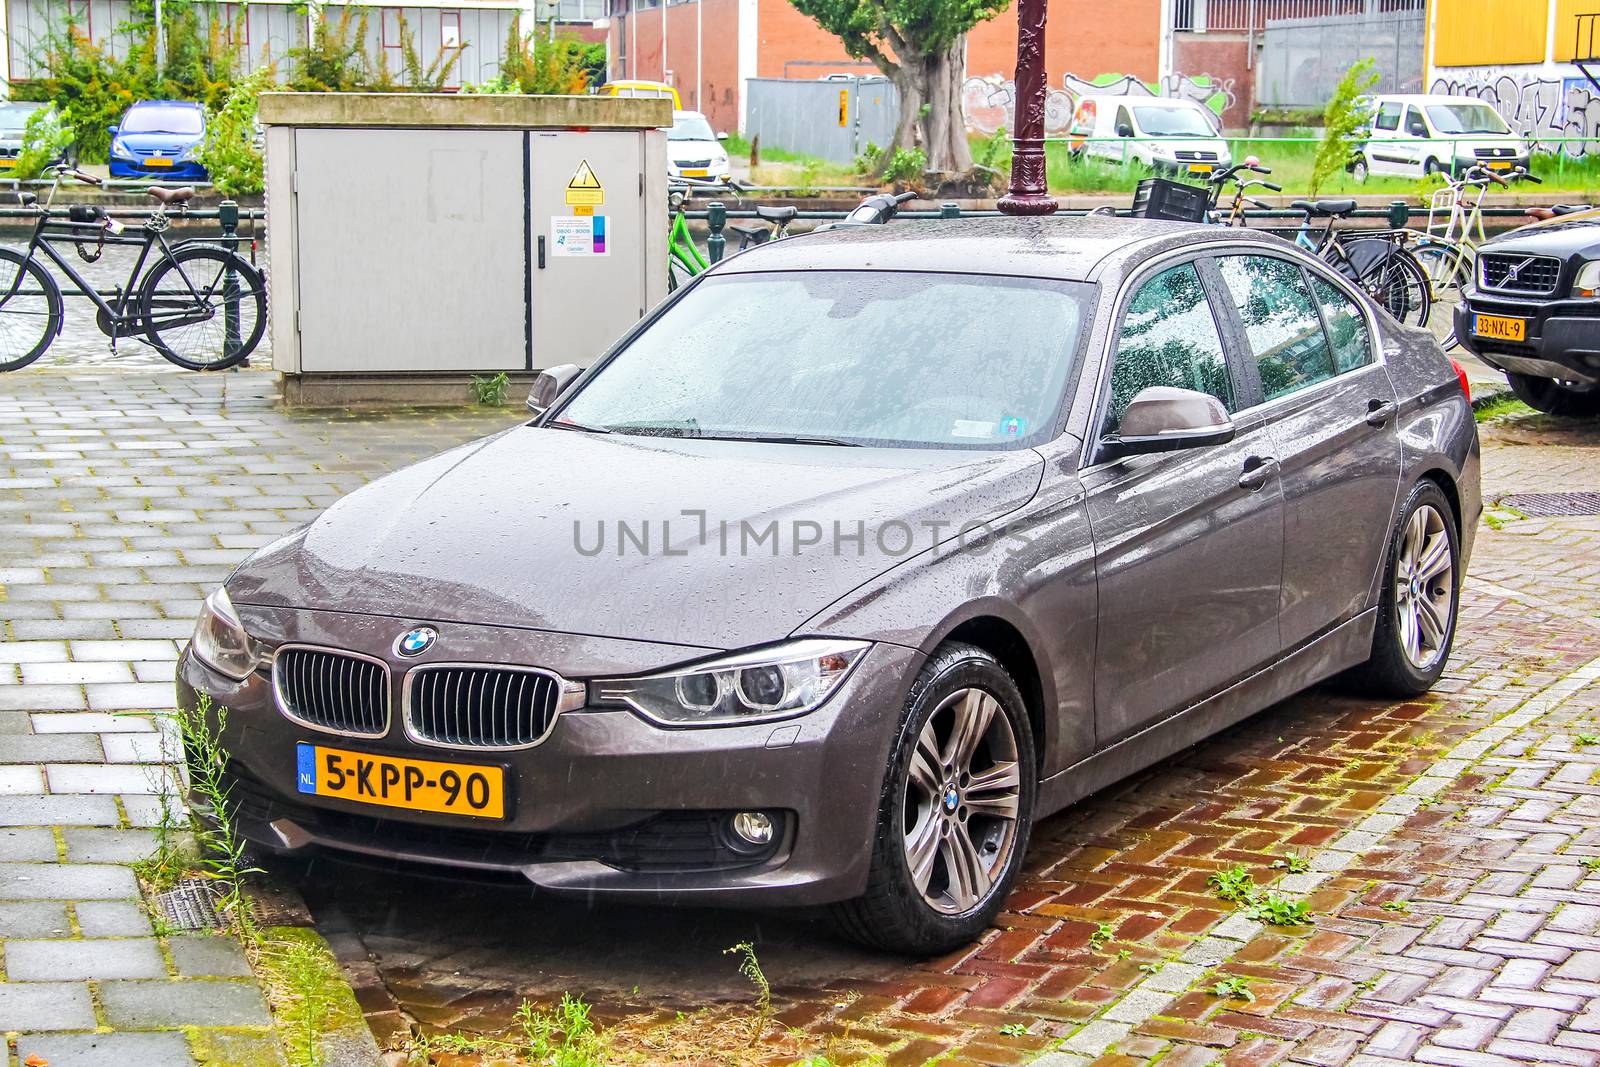 AMSTERDAM, NETHERLANDS - AUGUST 10, 2014: Motor car BMW F30 3-series at the city street.